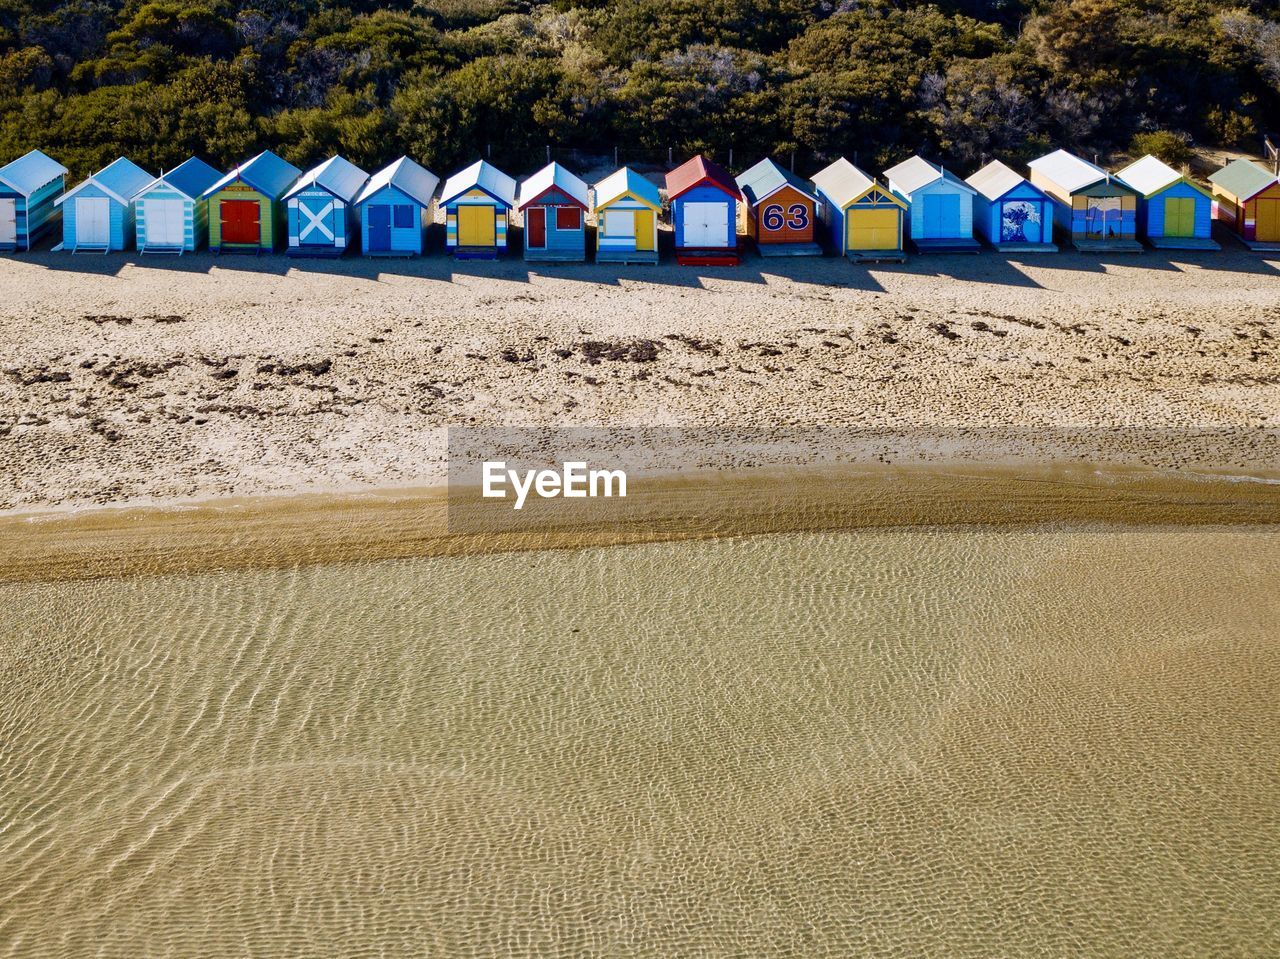 An aerial view of the colourful boat houses at the brighton beach in melbourne